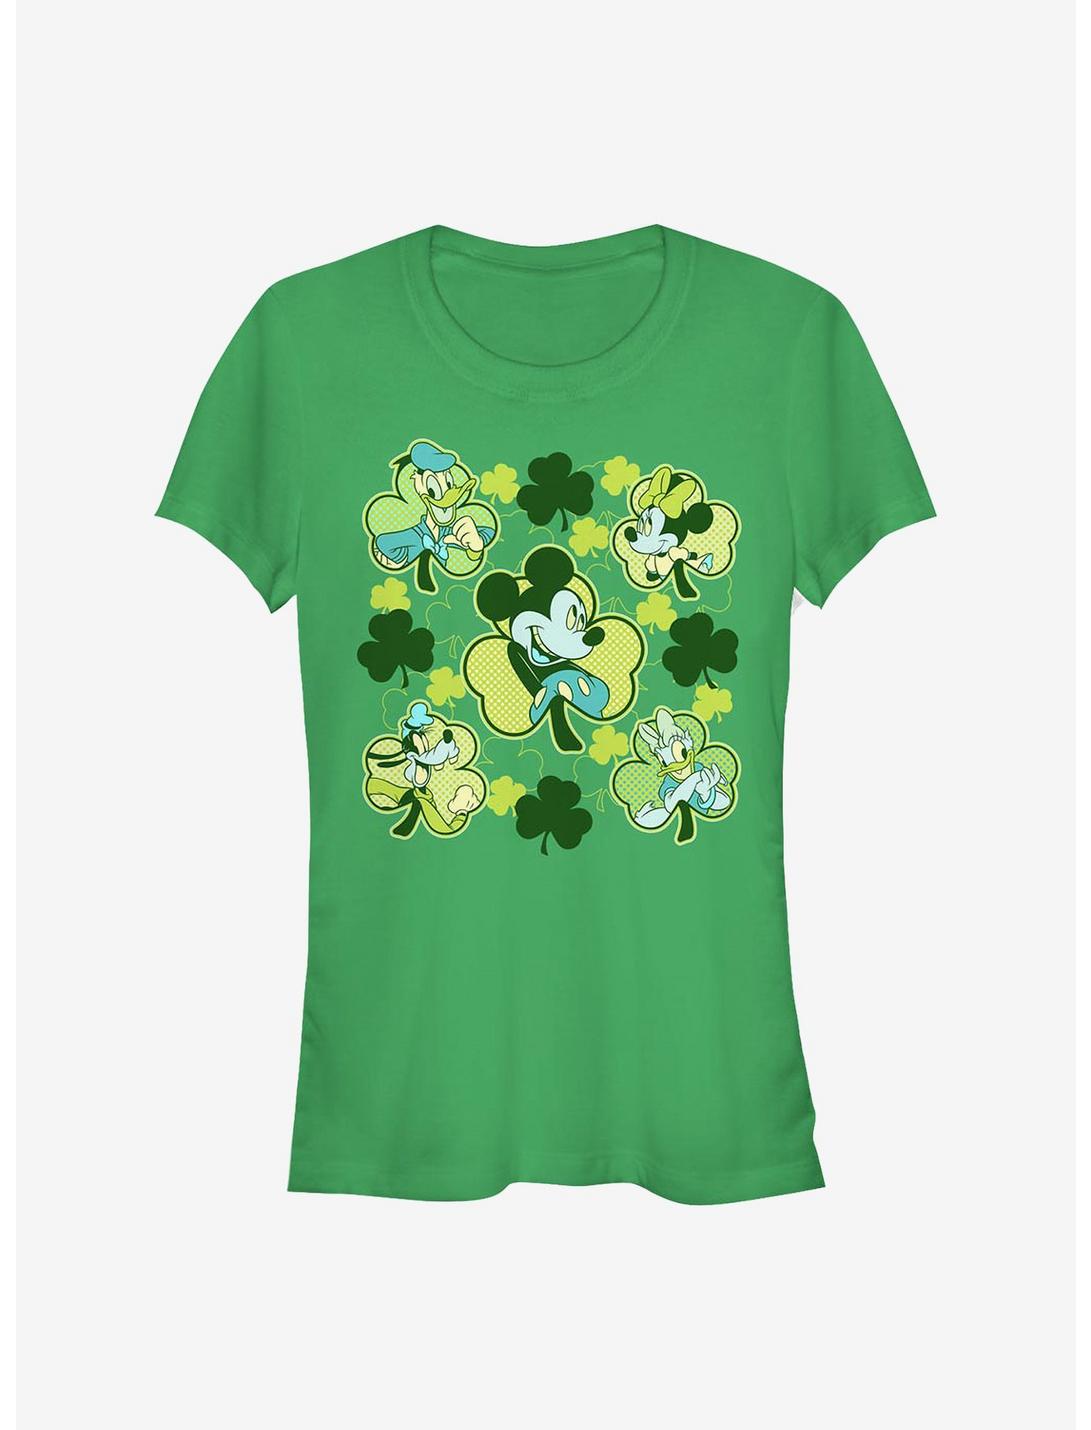 Disney Mickey Mouse & Friends Clovers Girls T-Shirt, KELLY, hi-res